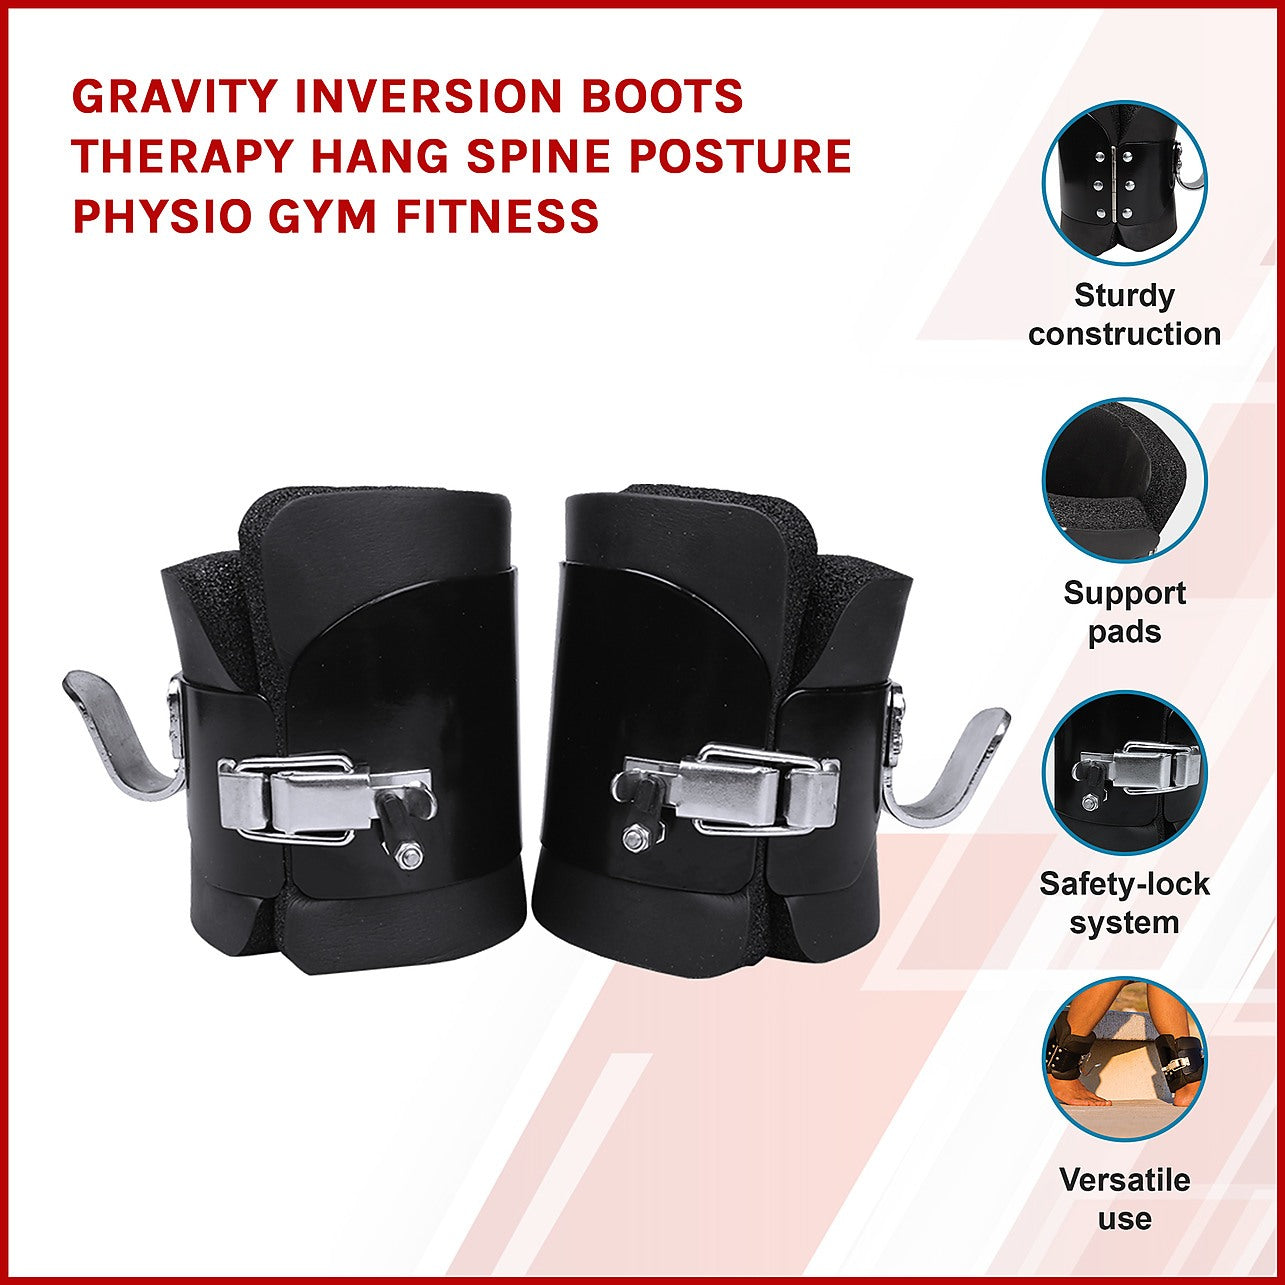 Gravity Inversion Boots Therapy Hang Spine Posture Physio Gym Fitness  Exercise